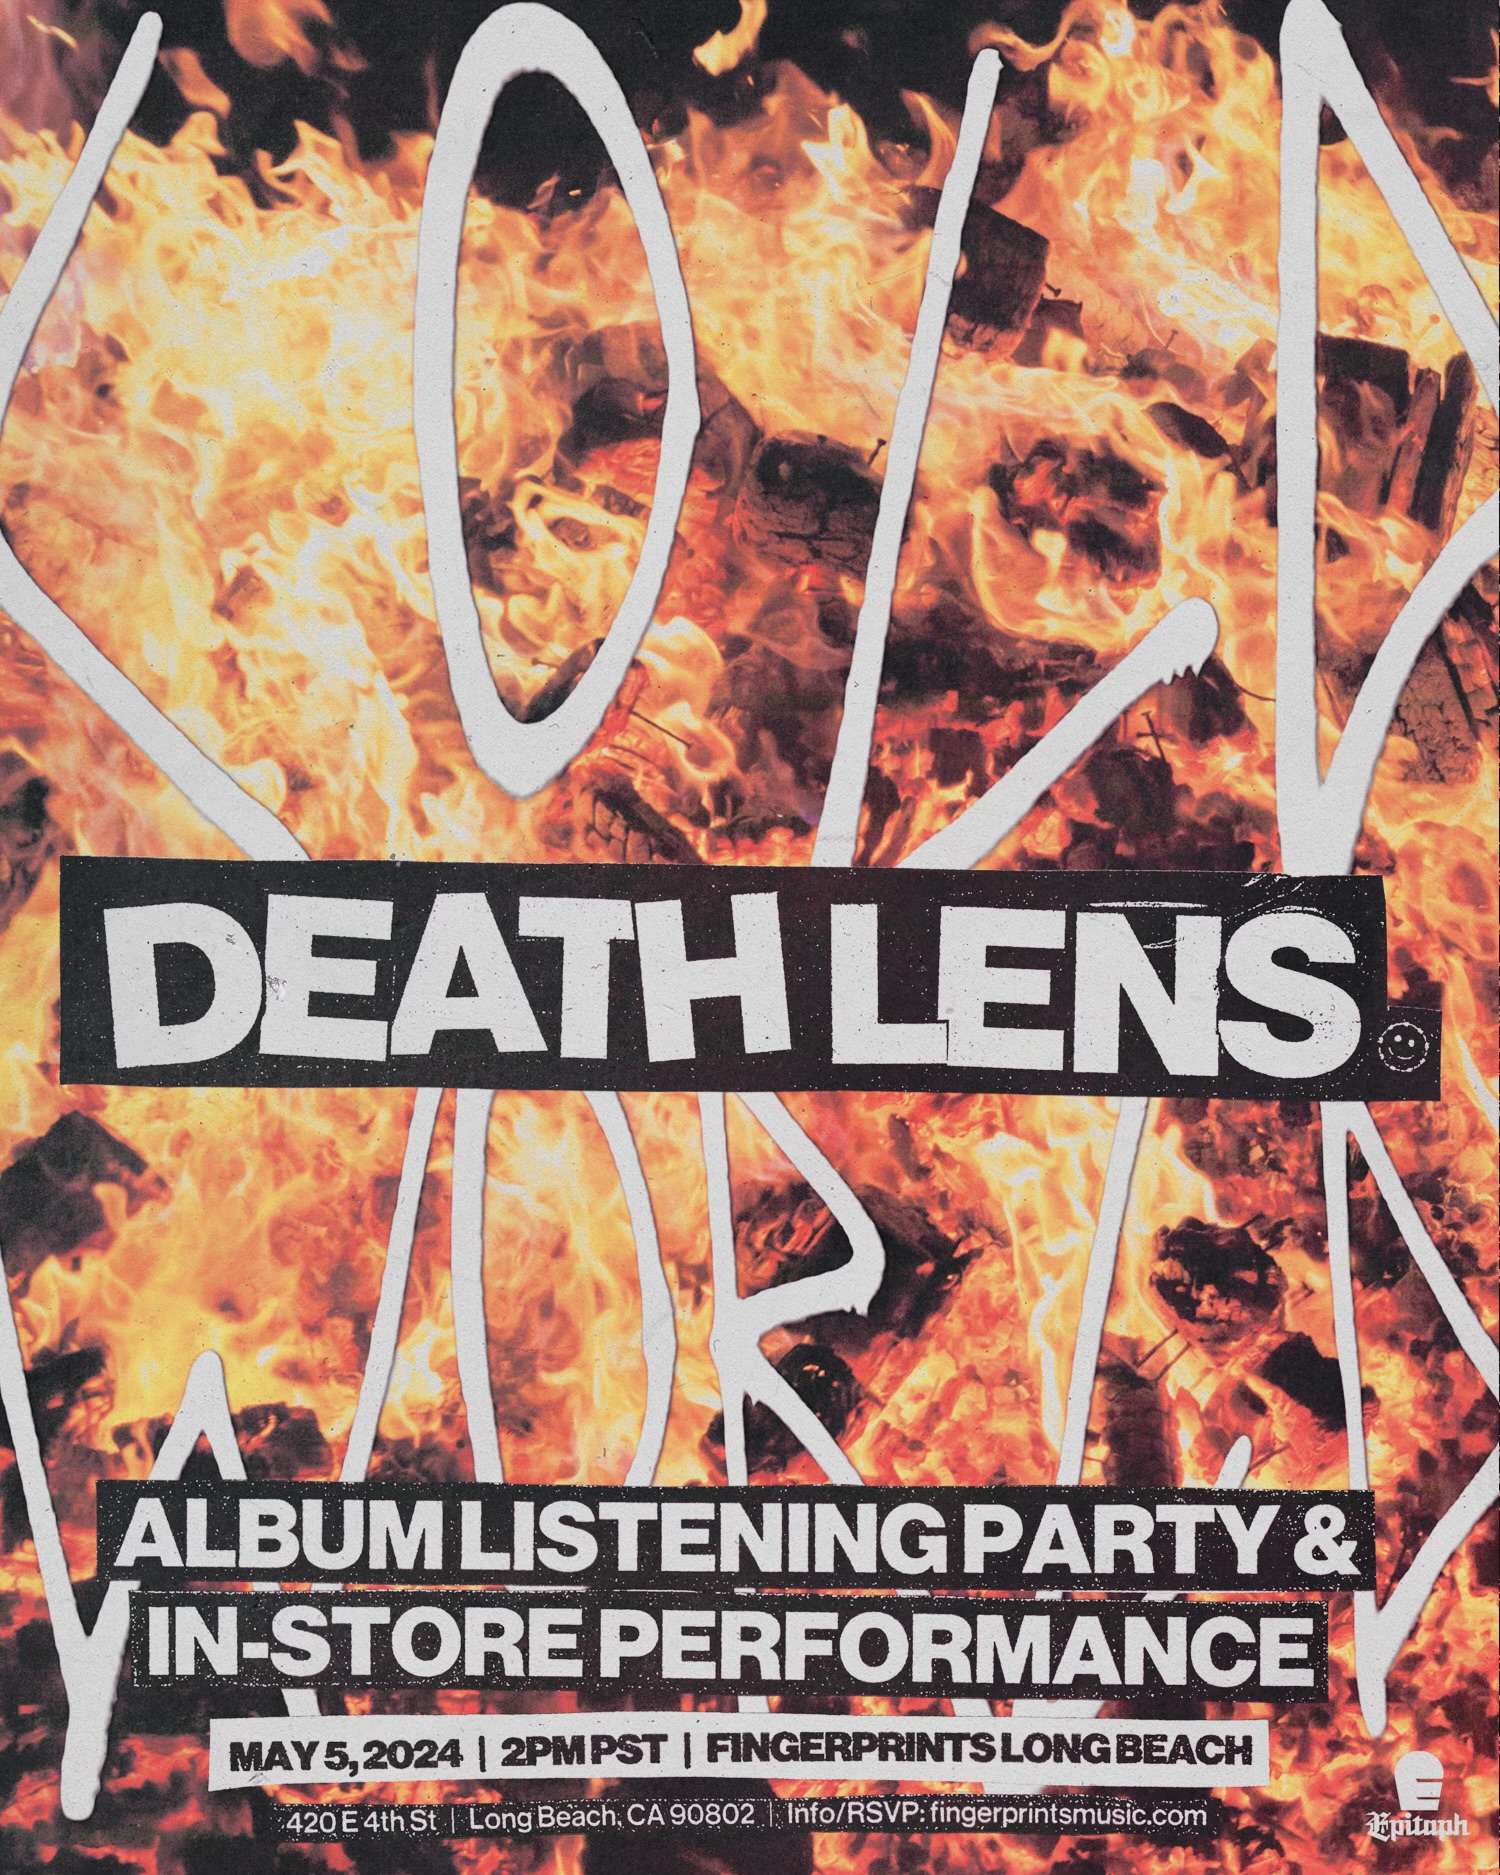 Death Lens Live Stripped Down Performance and Signing at Fingerprints 5/5 at 2pm